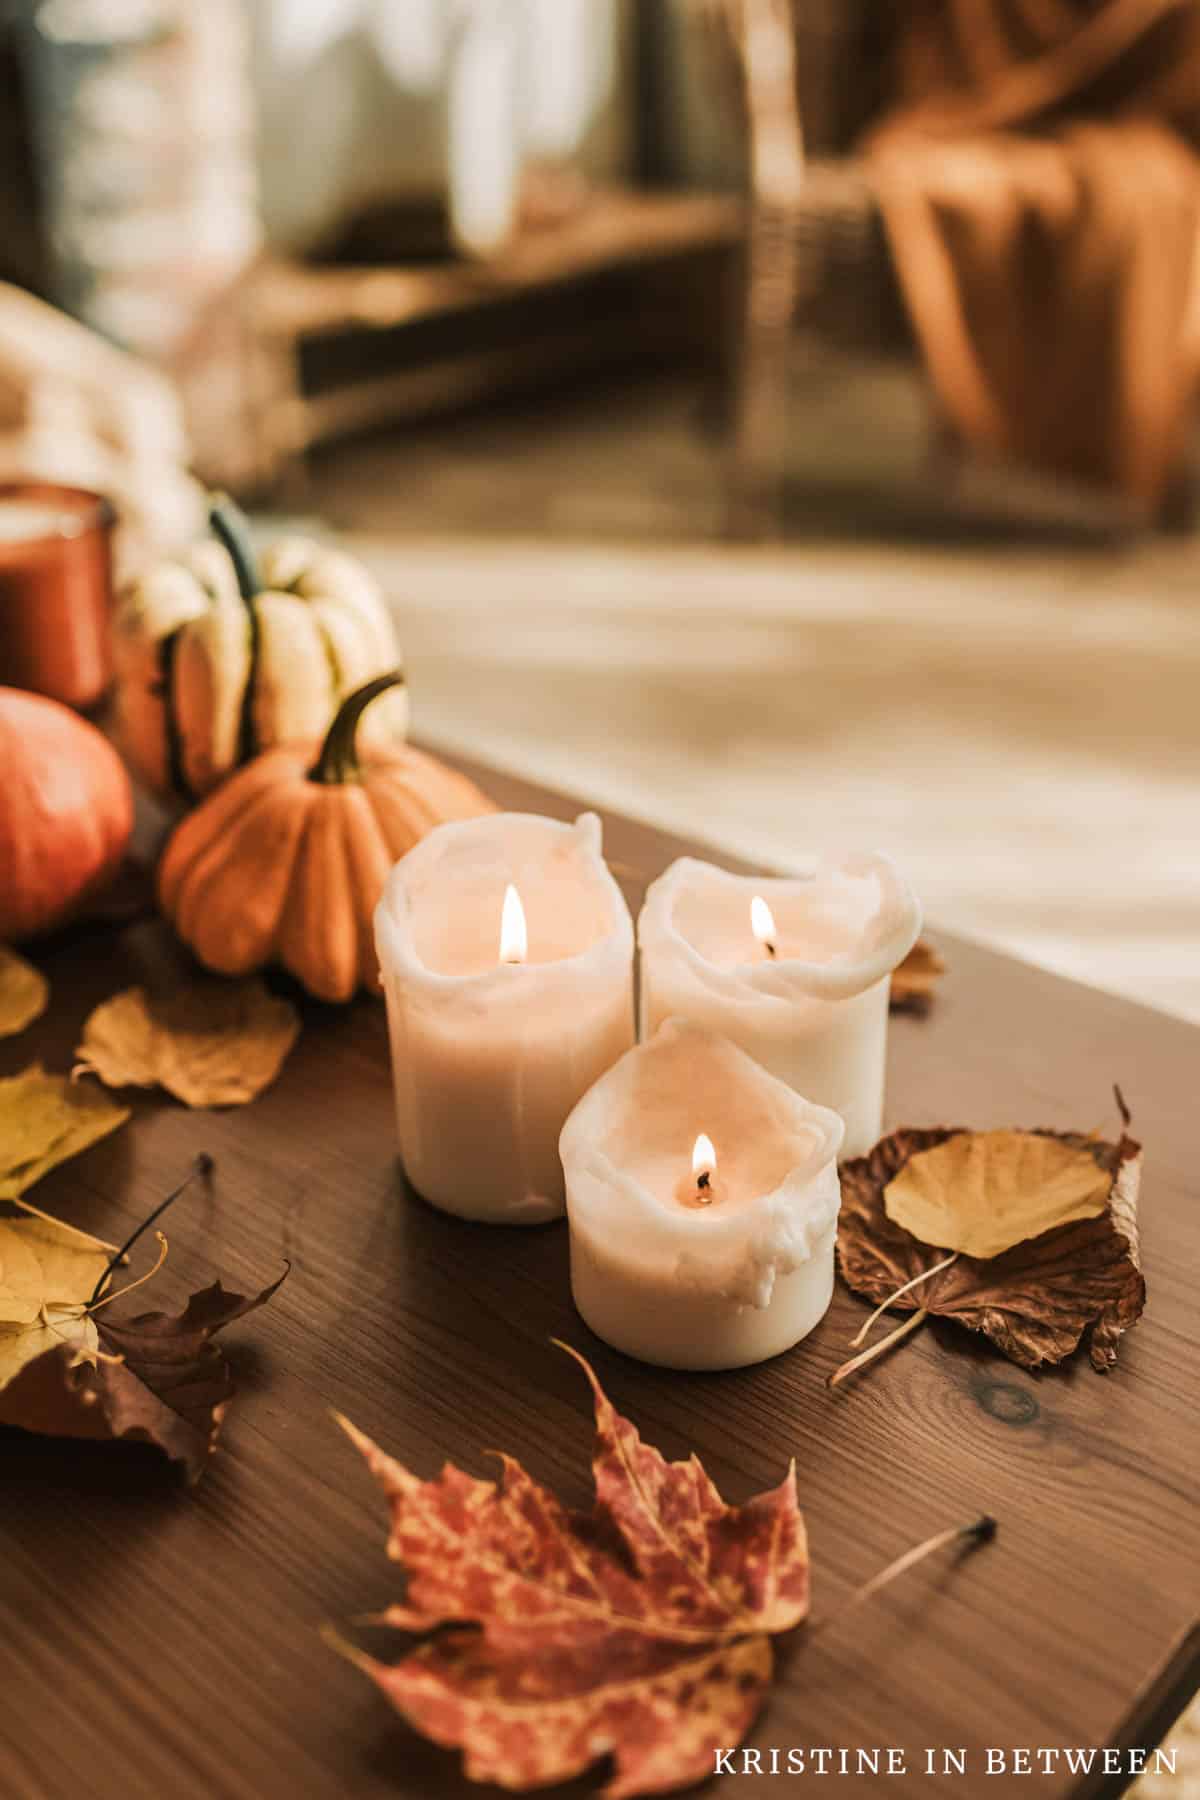 Candles and pumpkins sitting on a coffee table with a chair and an orange blanket in the background.